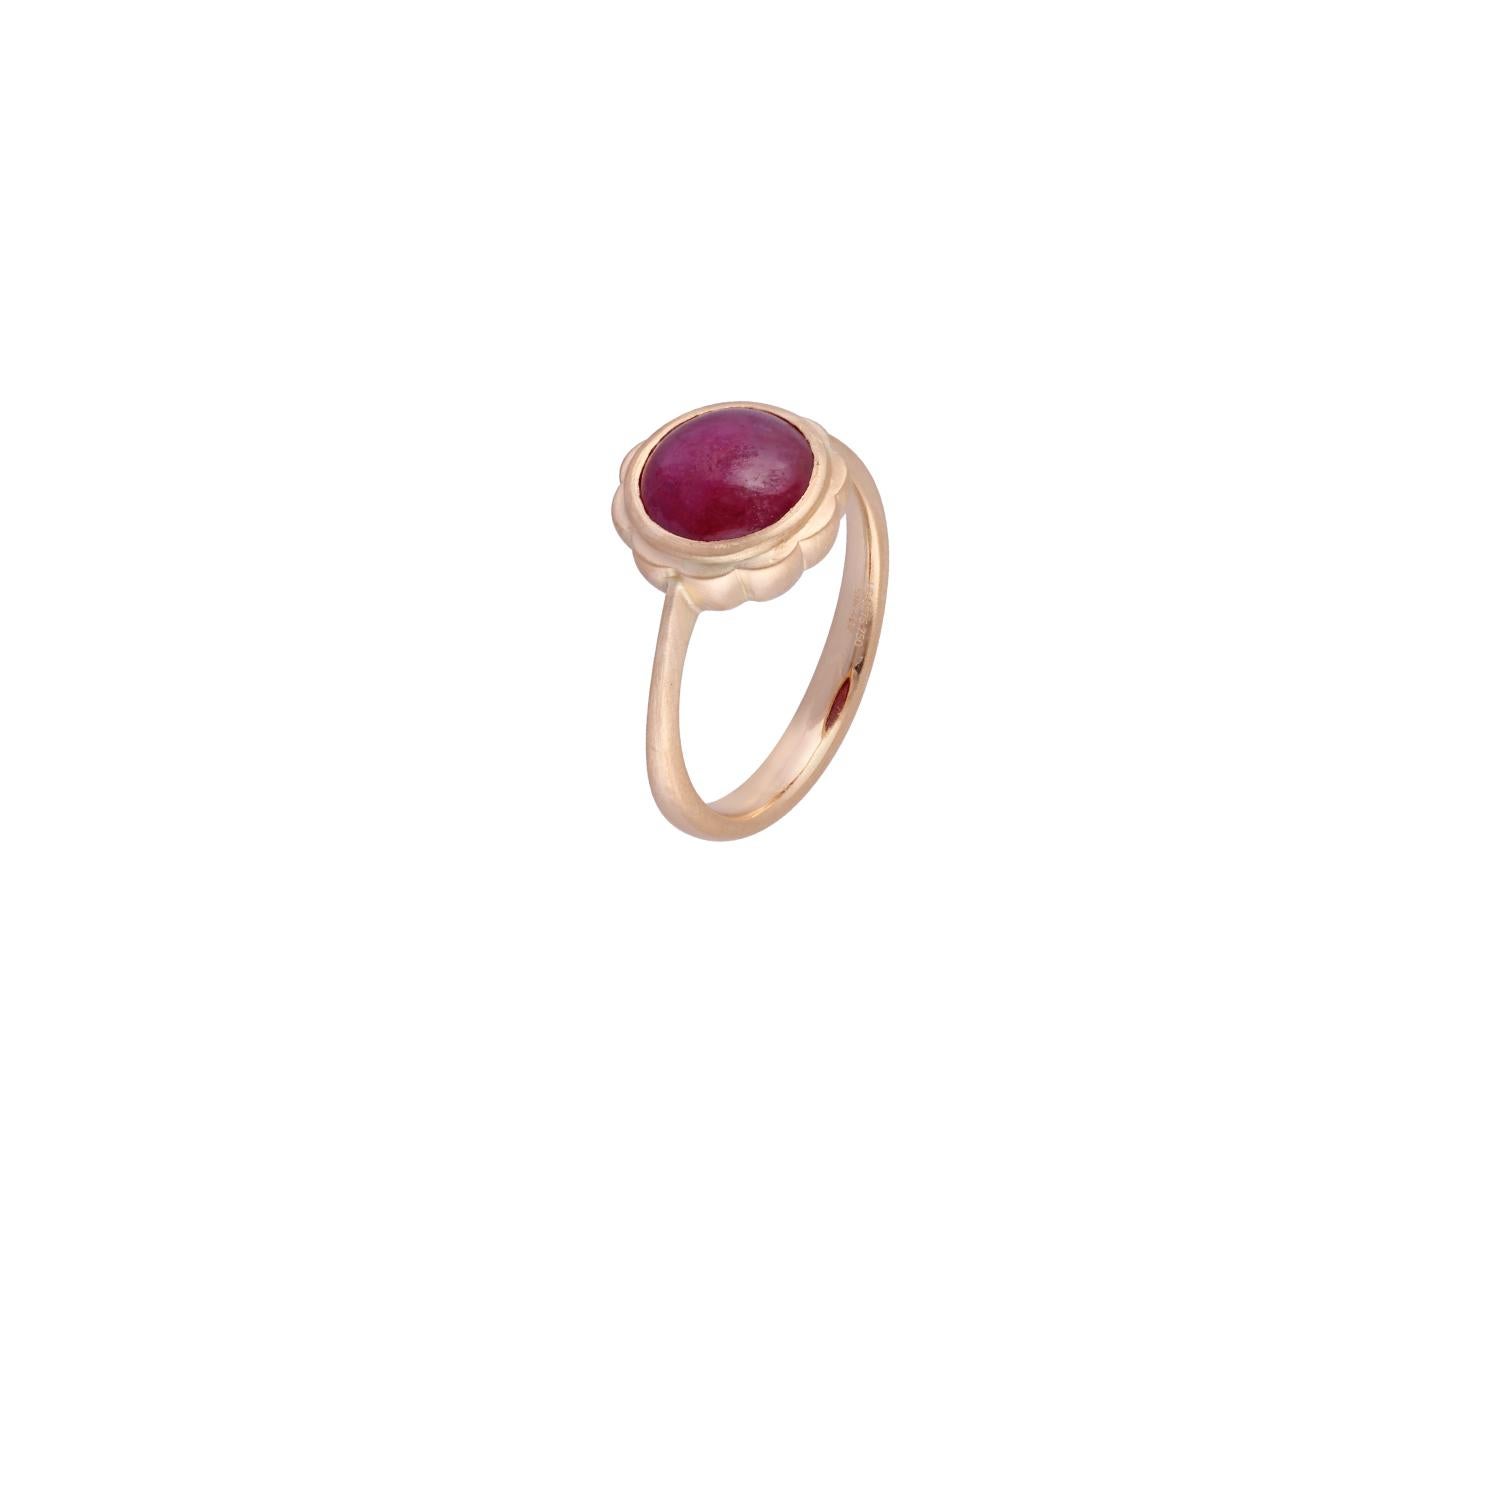 Star Ruby  Surrounded By Matte Finish 18k Yellow Gold Ring


Star Ruby - 4.68 CTS

Matte Finish 18k Yellow Gold

Custom Services
Resizing is available.
Request Customization

size - 7




